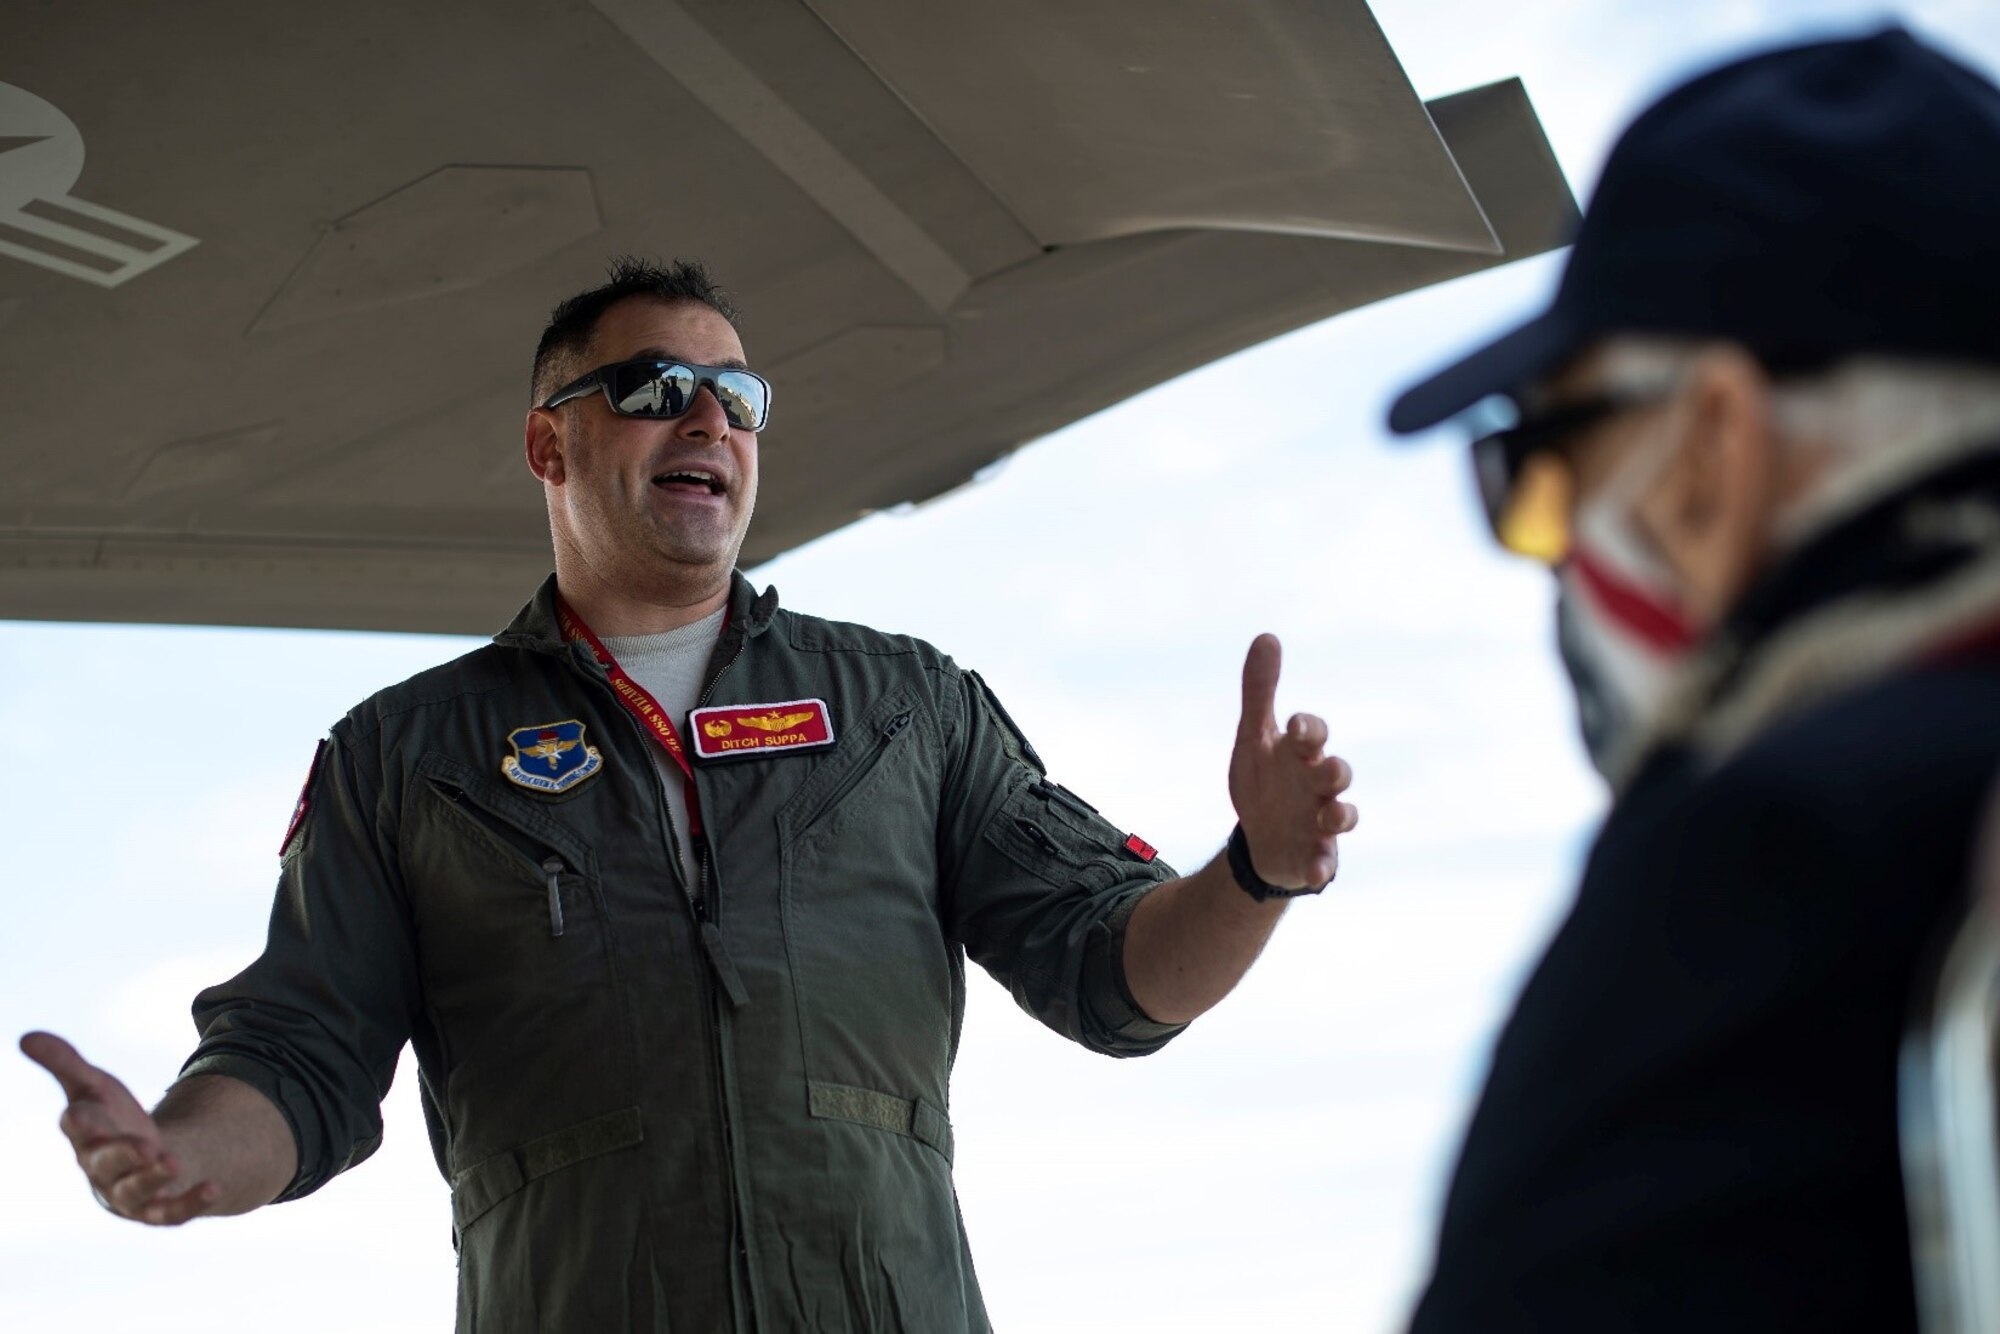 A military member in a flight suit speaks to Dean "Diz" Laird next to a fighter jet.